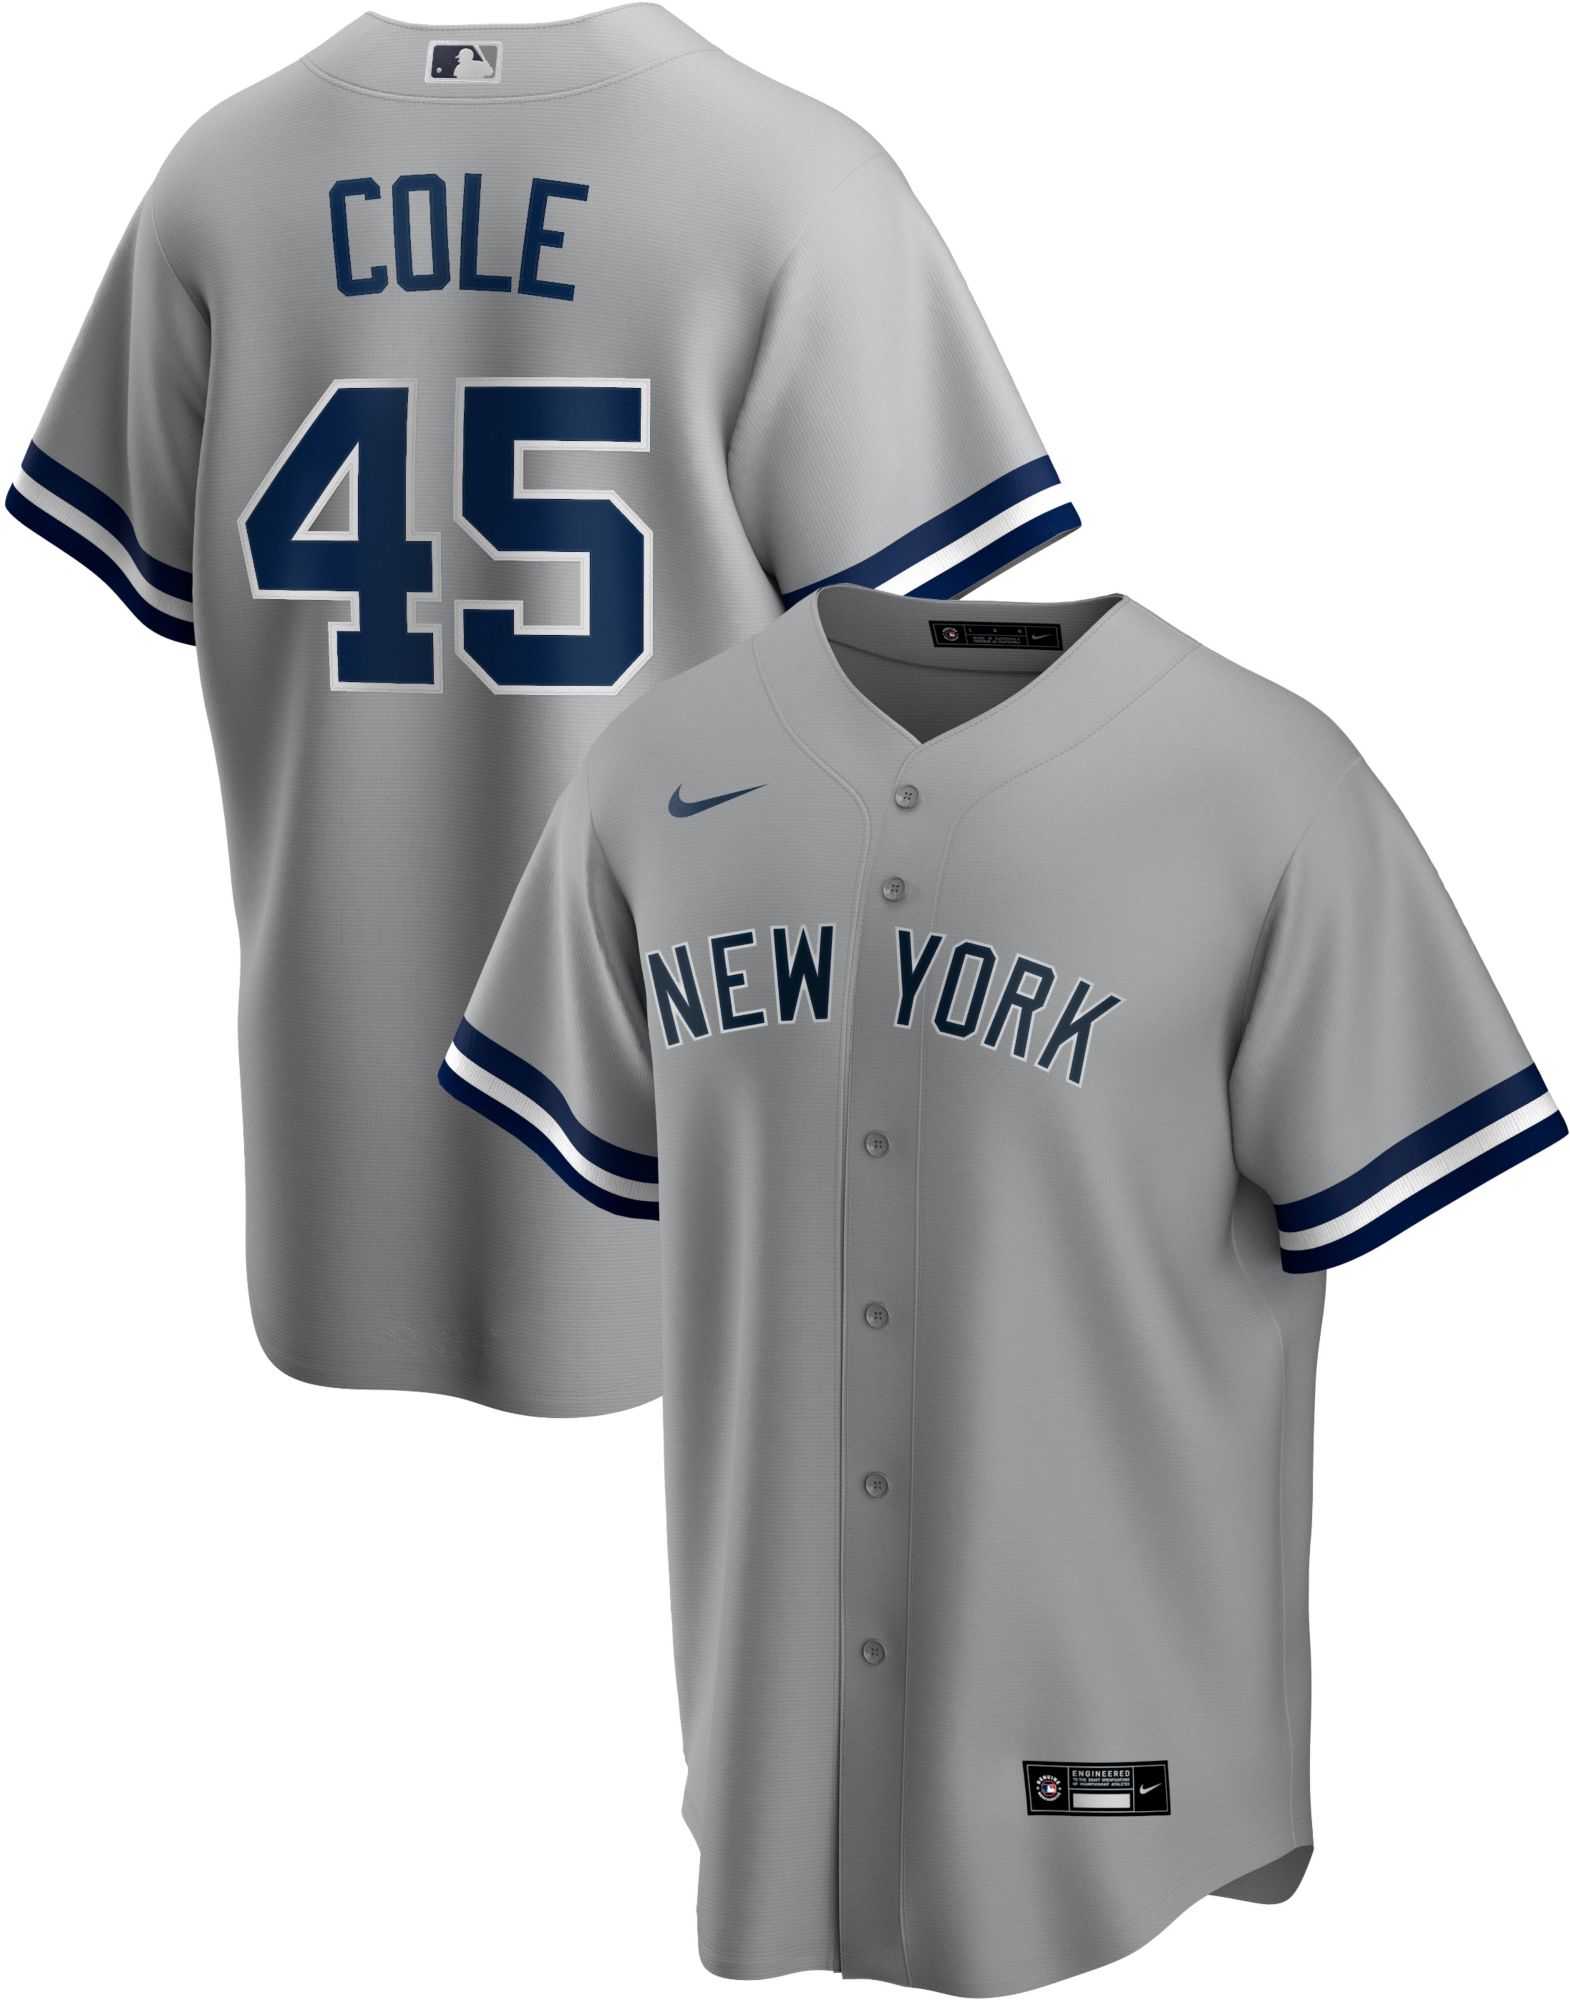 Gerrit Cole New York Yankees Nike Authentic Gray Road Jersey Men's Size 52  for Sale in Lindenhurst, NY - OfferUp